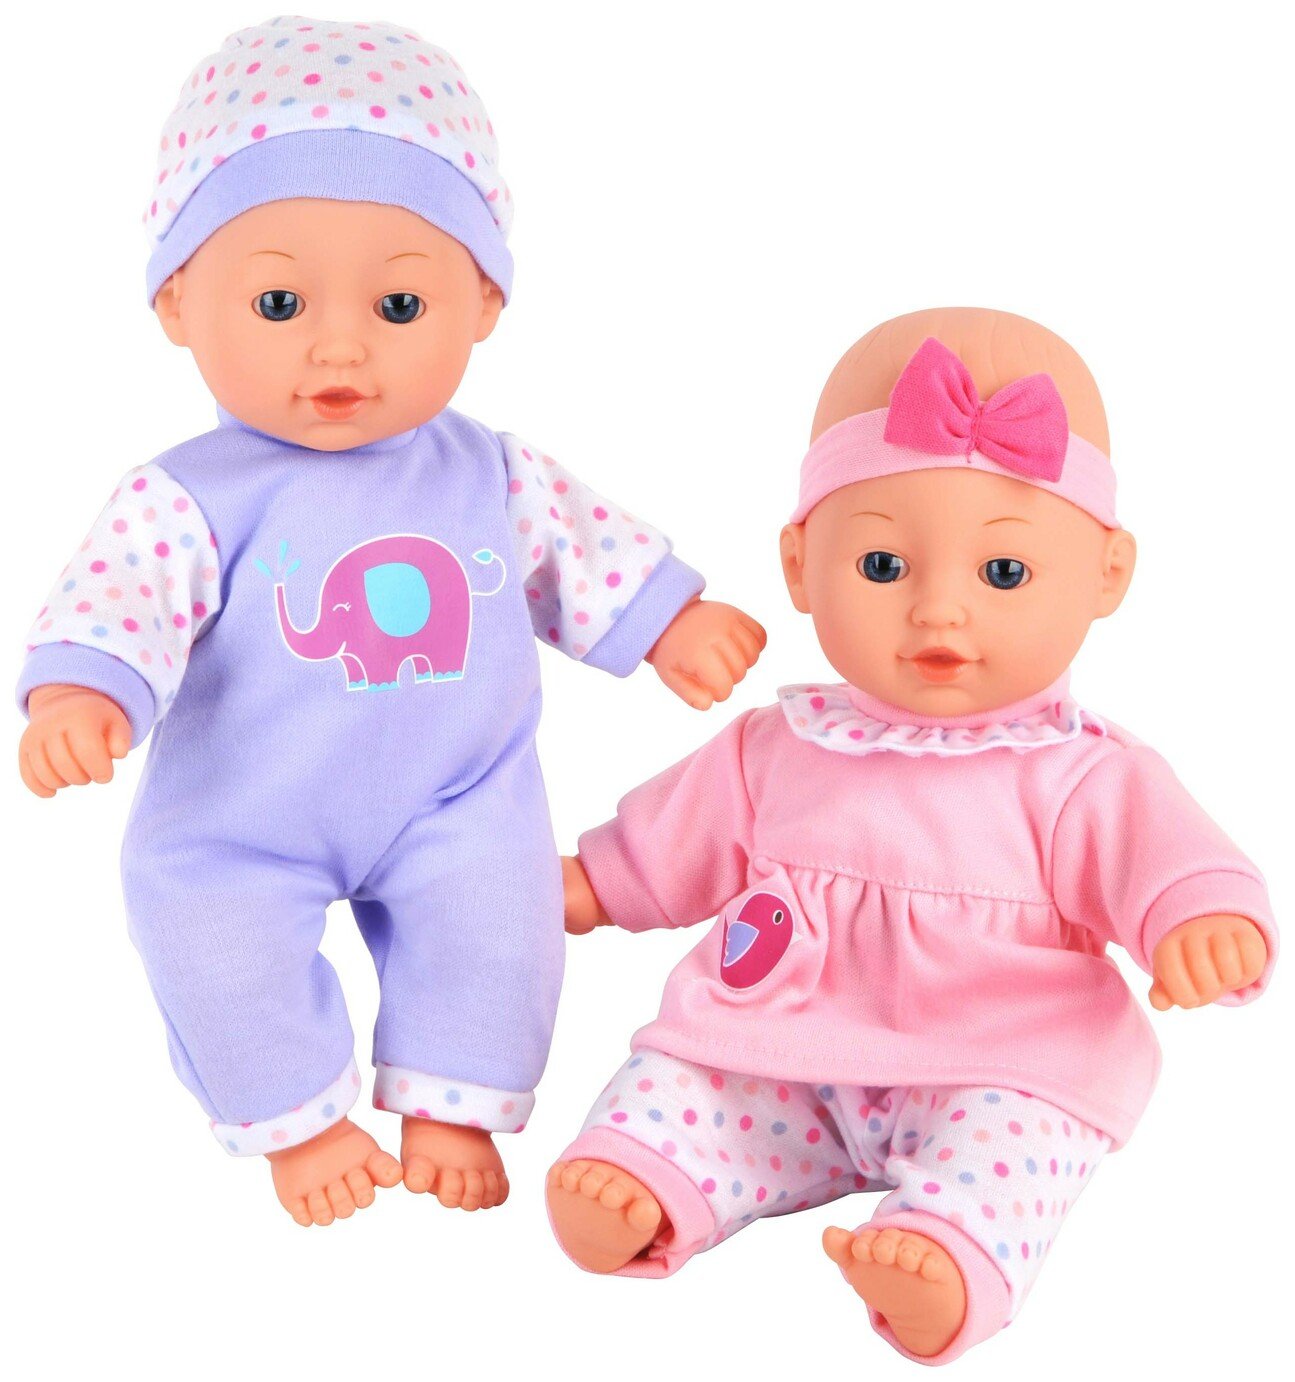 dolls for infants and toddlers